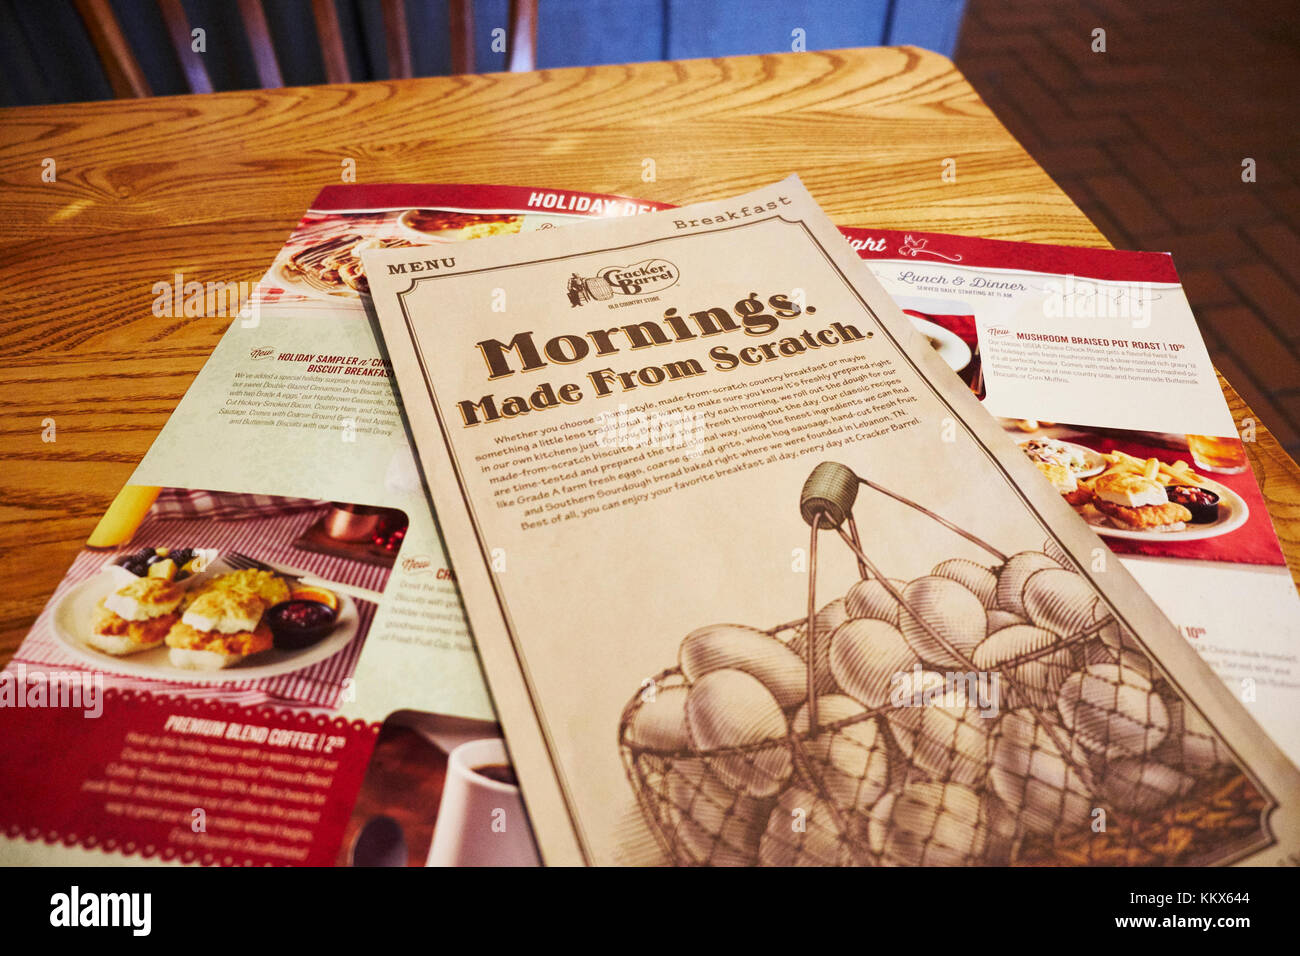 Menu on table for the breakfast meal at Cracker Barrel, Montgomery Alabama, USA. Stock Photo